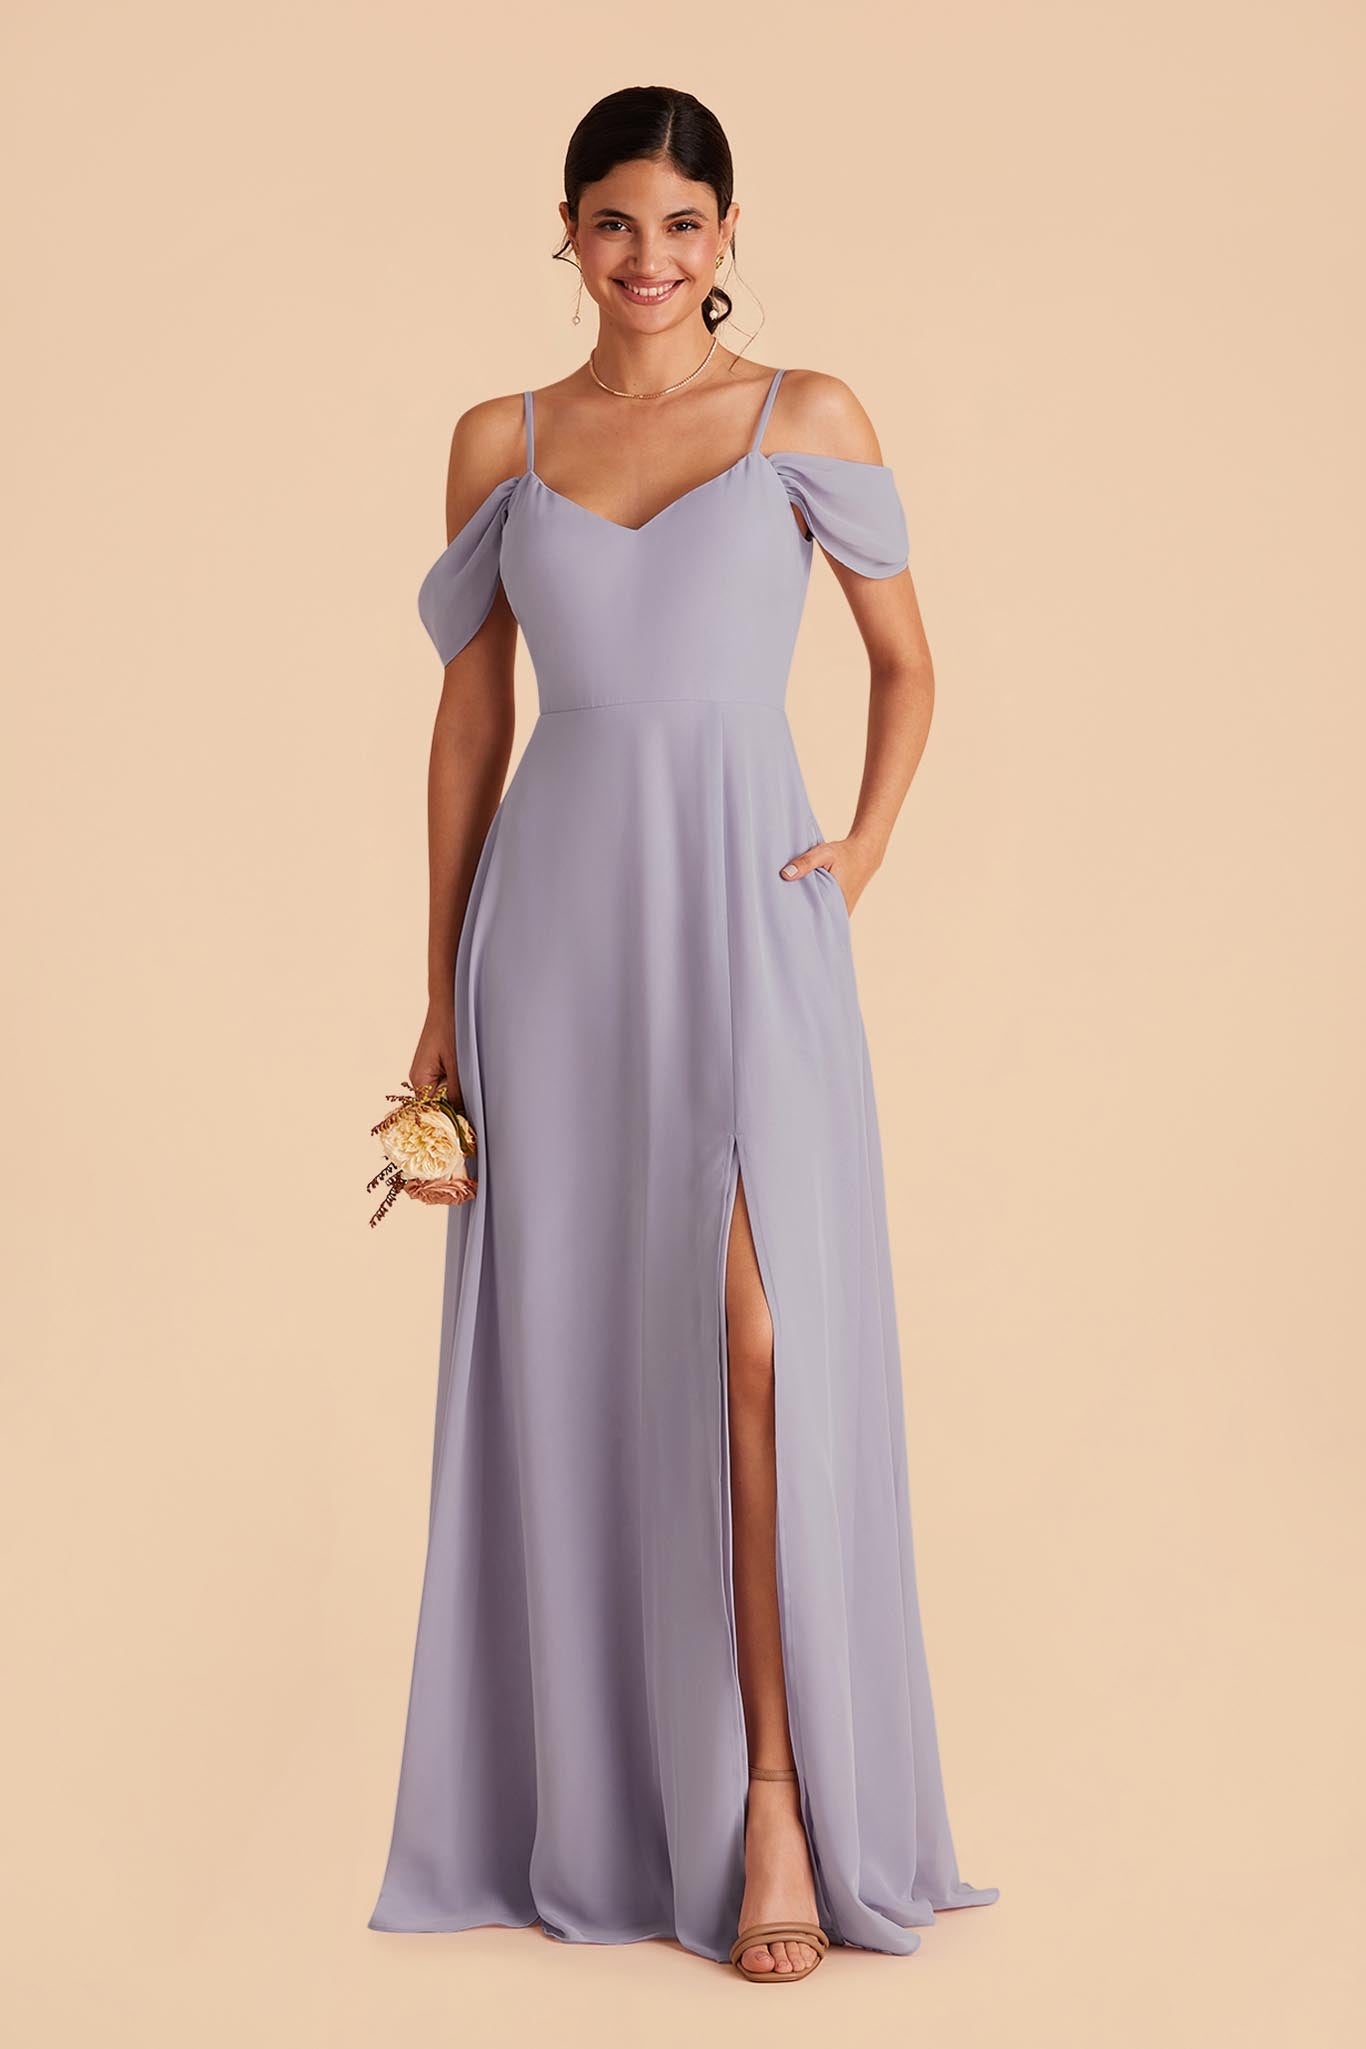 Dusty Lilac Devin Convertible Dress by Birdy Grey